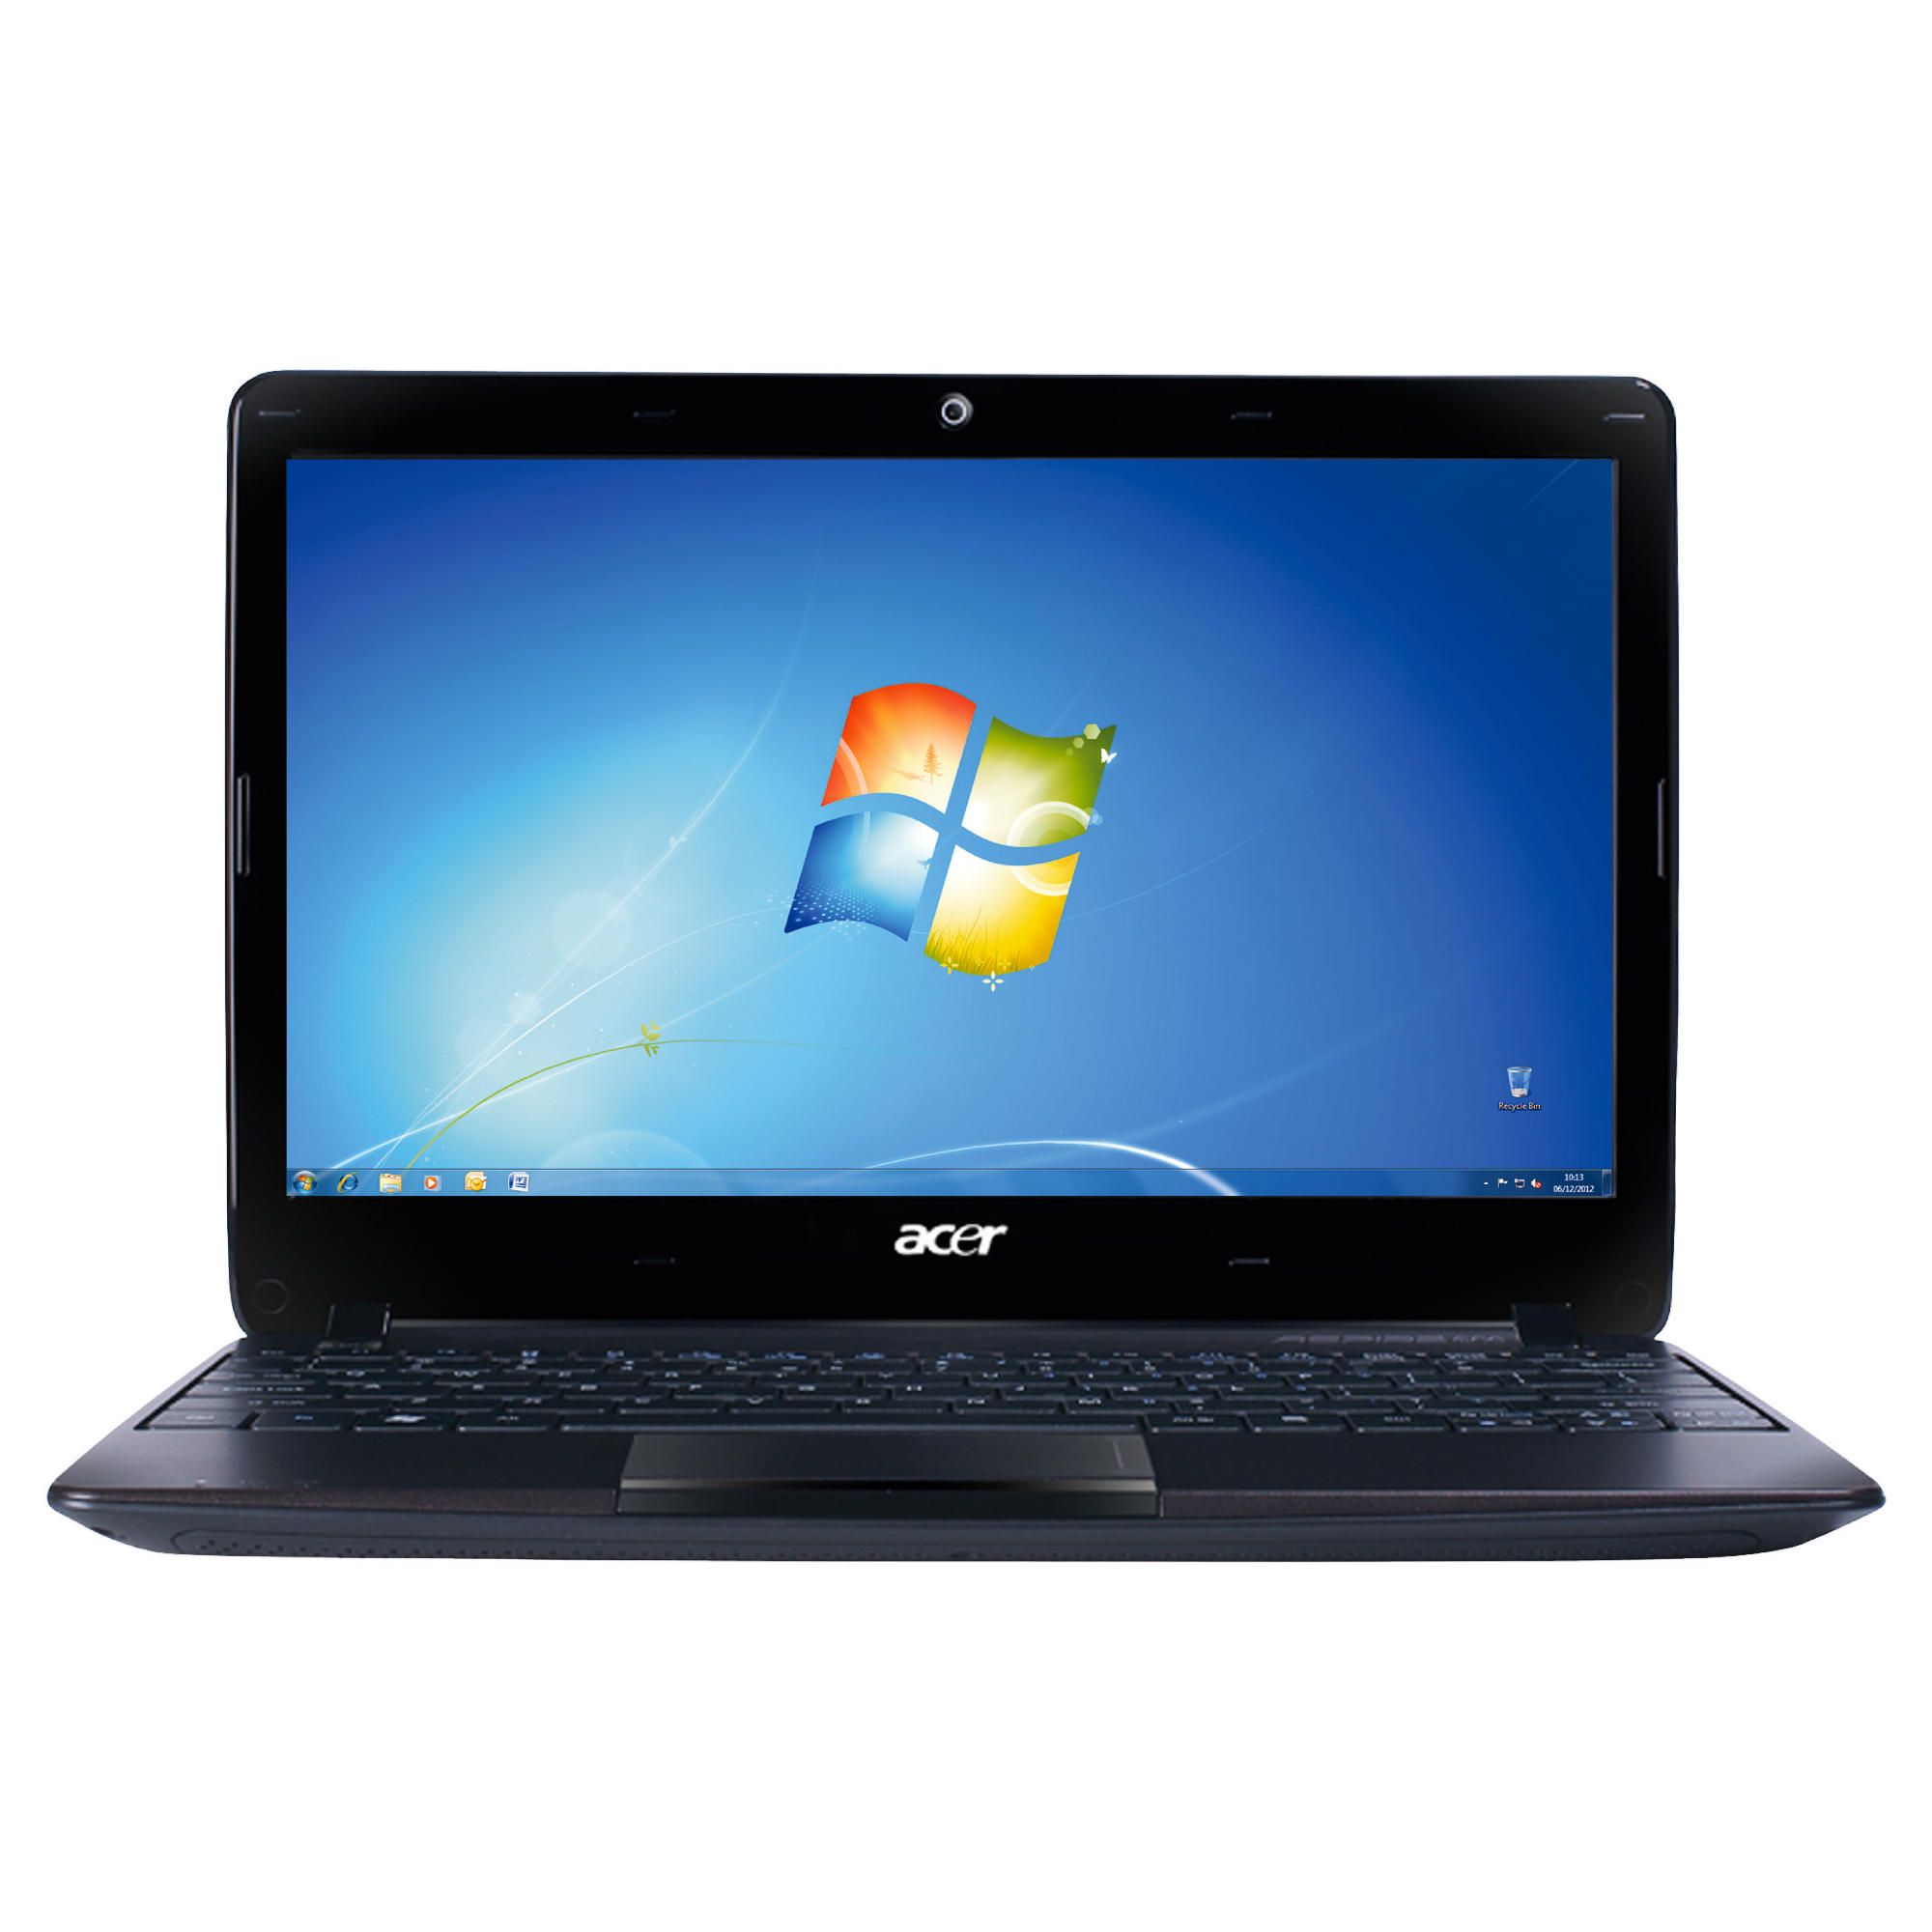 The Acer Aspire One 722 Netbook at Tescos Direct